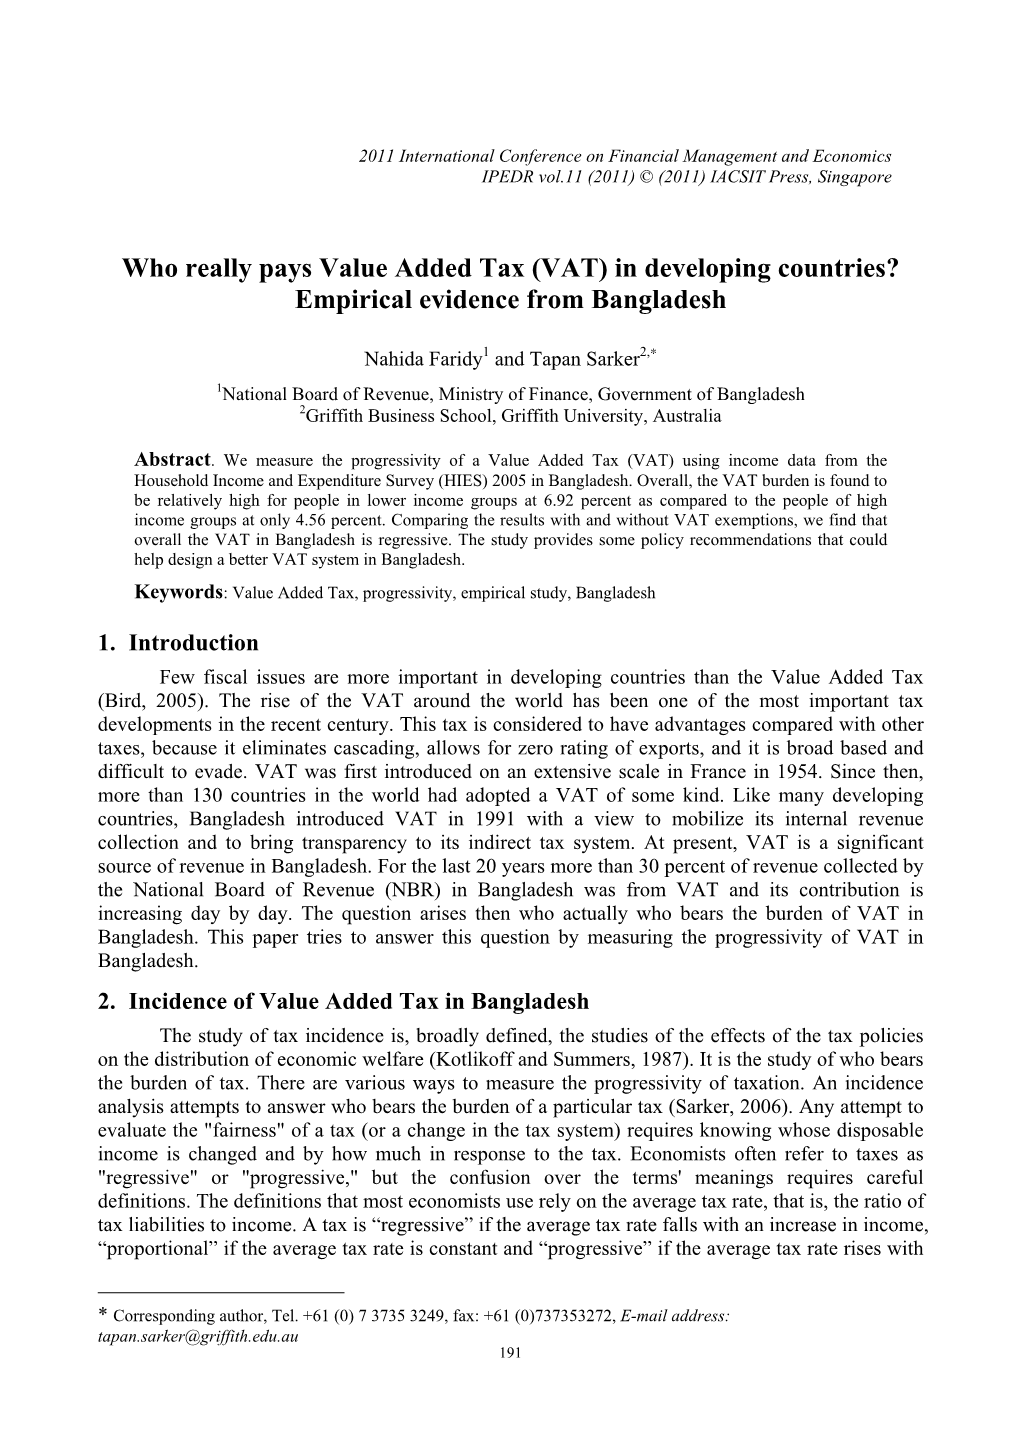 Who Really Pays Value Added Tax (VAT) in Developing Countries? Empirical Evidence from Bangladesh